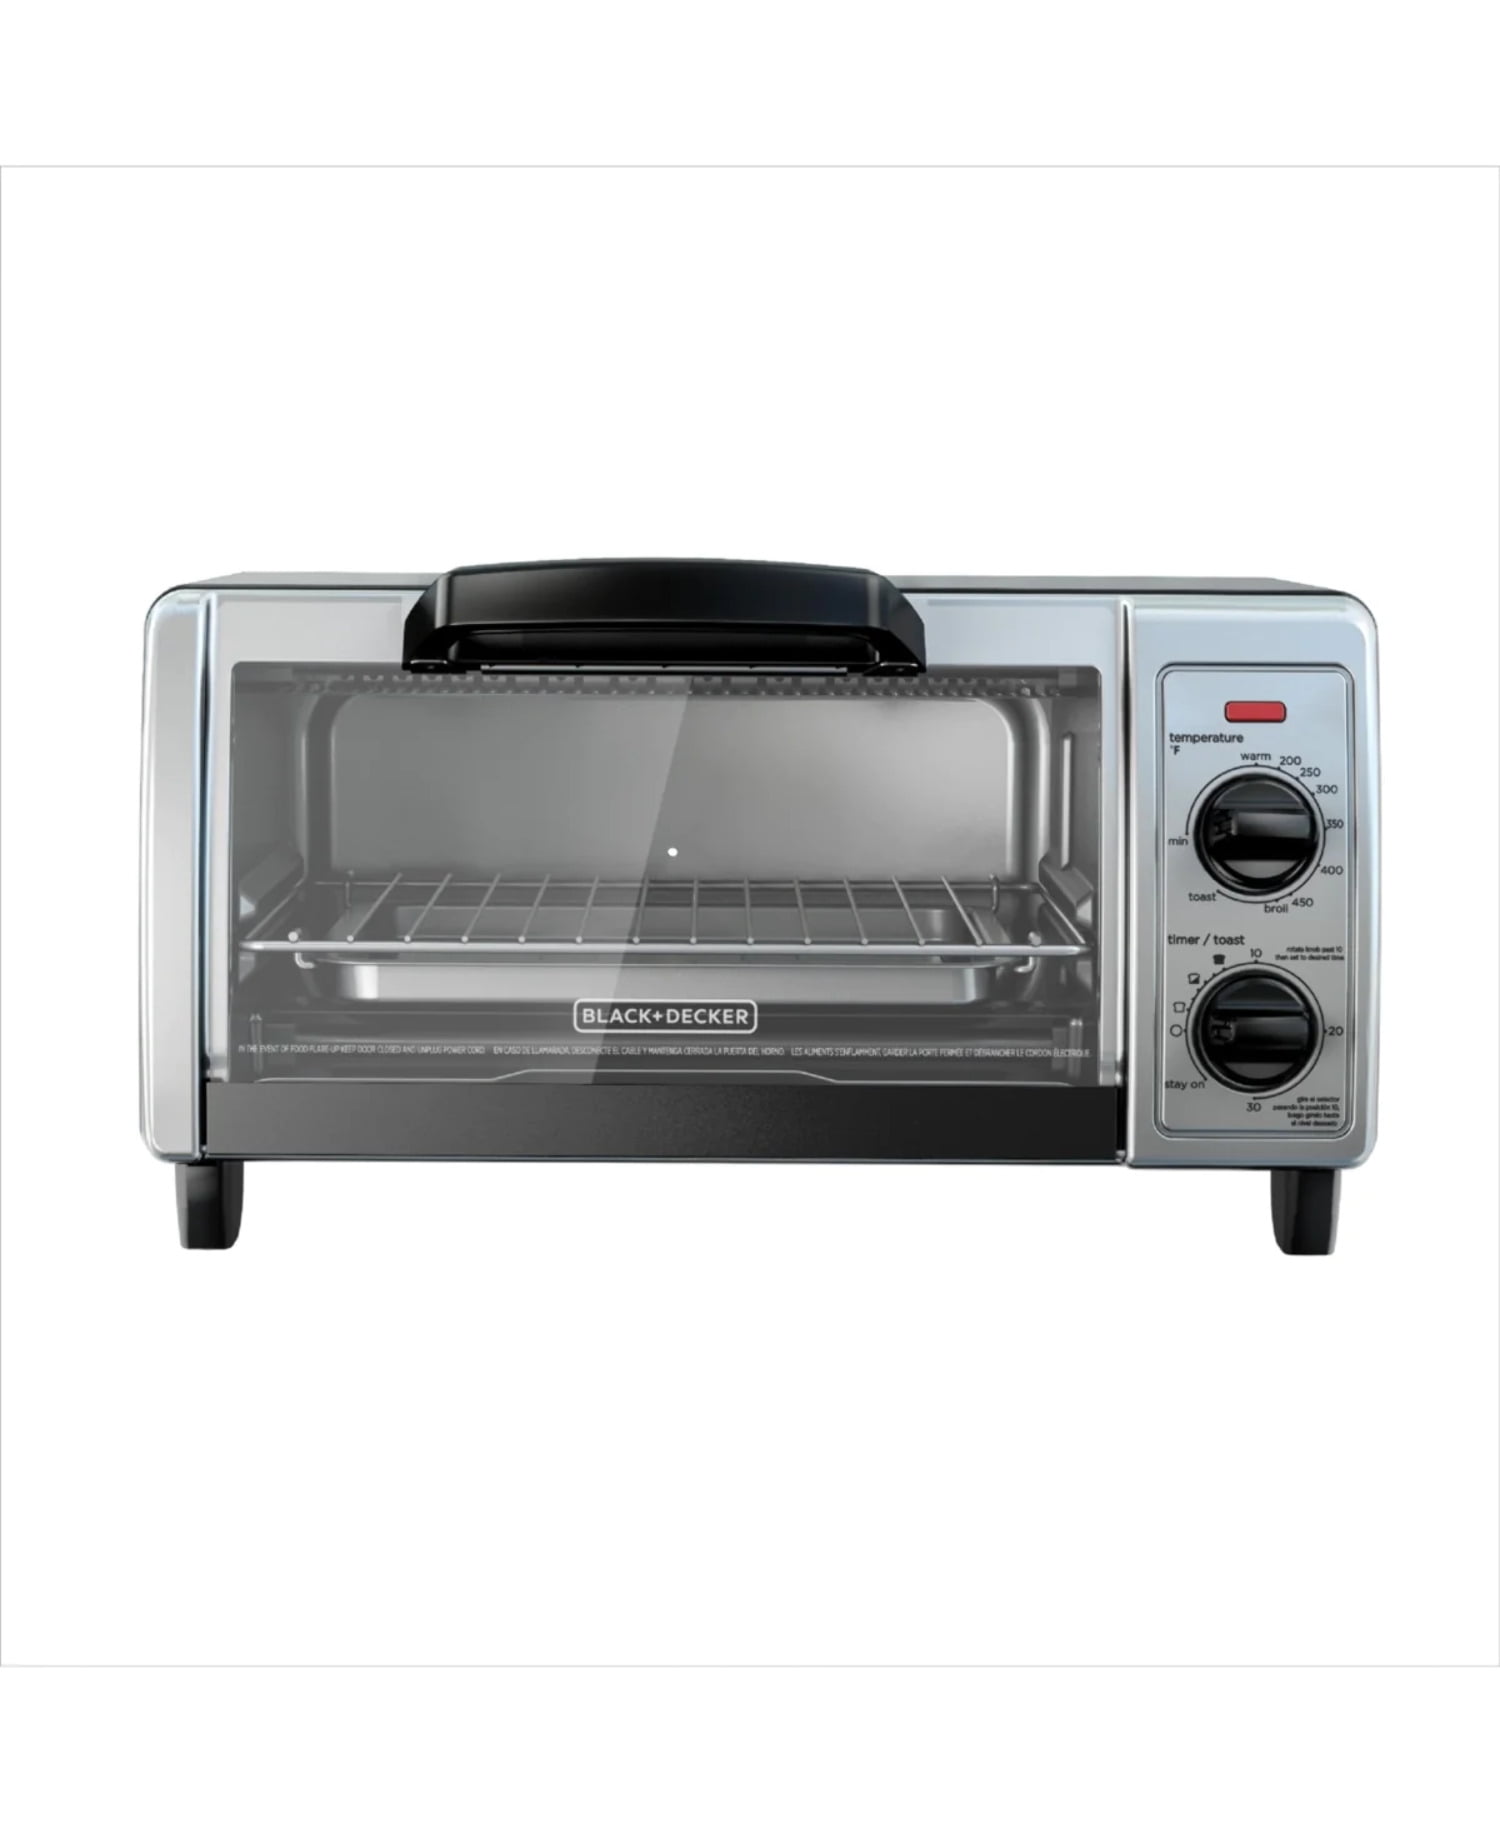 Picture of Black & Decker TO1705SB Black Decker 4 Slice Toaster Oven - Stainless Steel